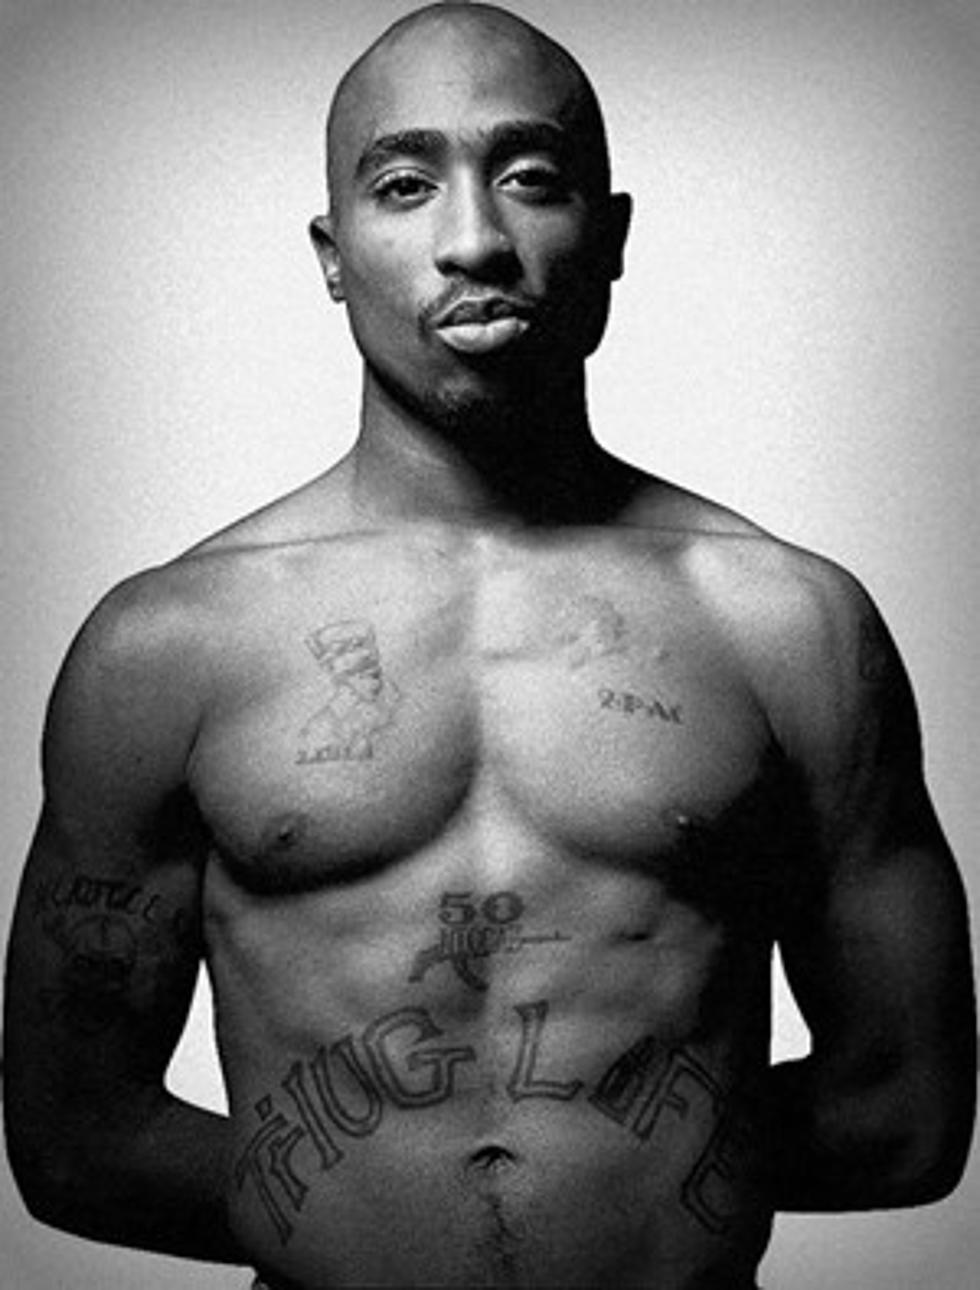 Tupac Becomes The 6th Rap Artist Inducted Into The Rock &#038; Roll Hall Of Fame &#8211; Tha Wire